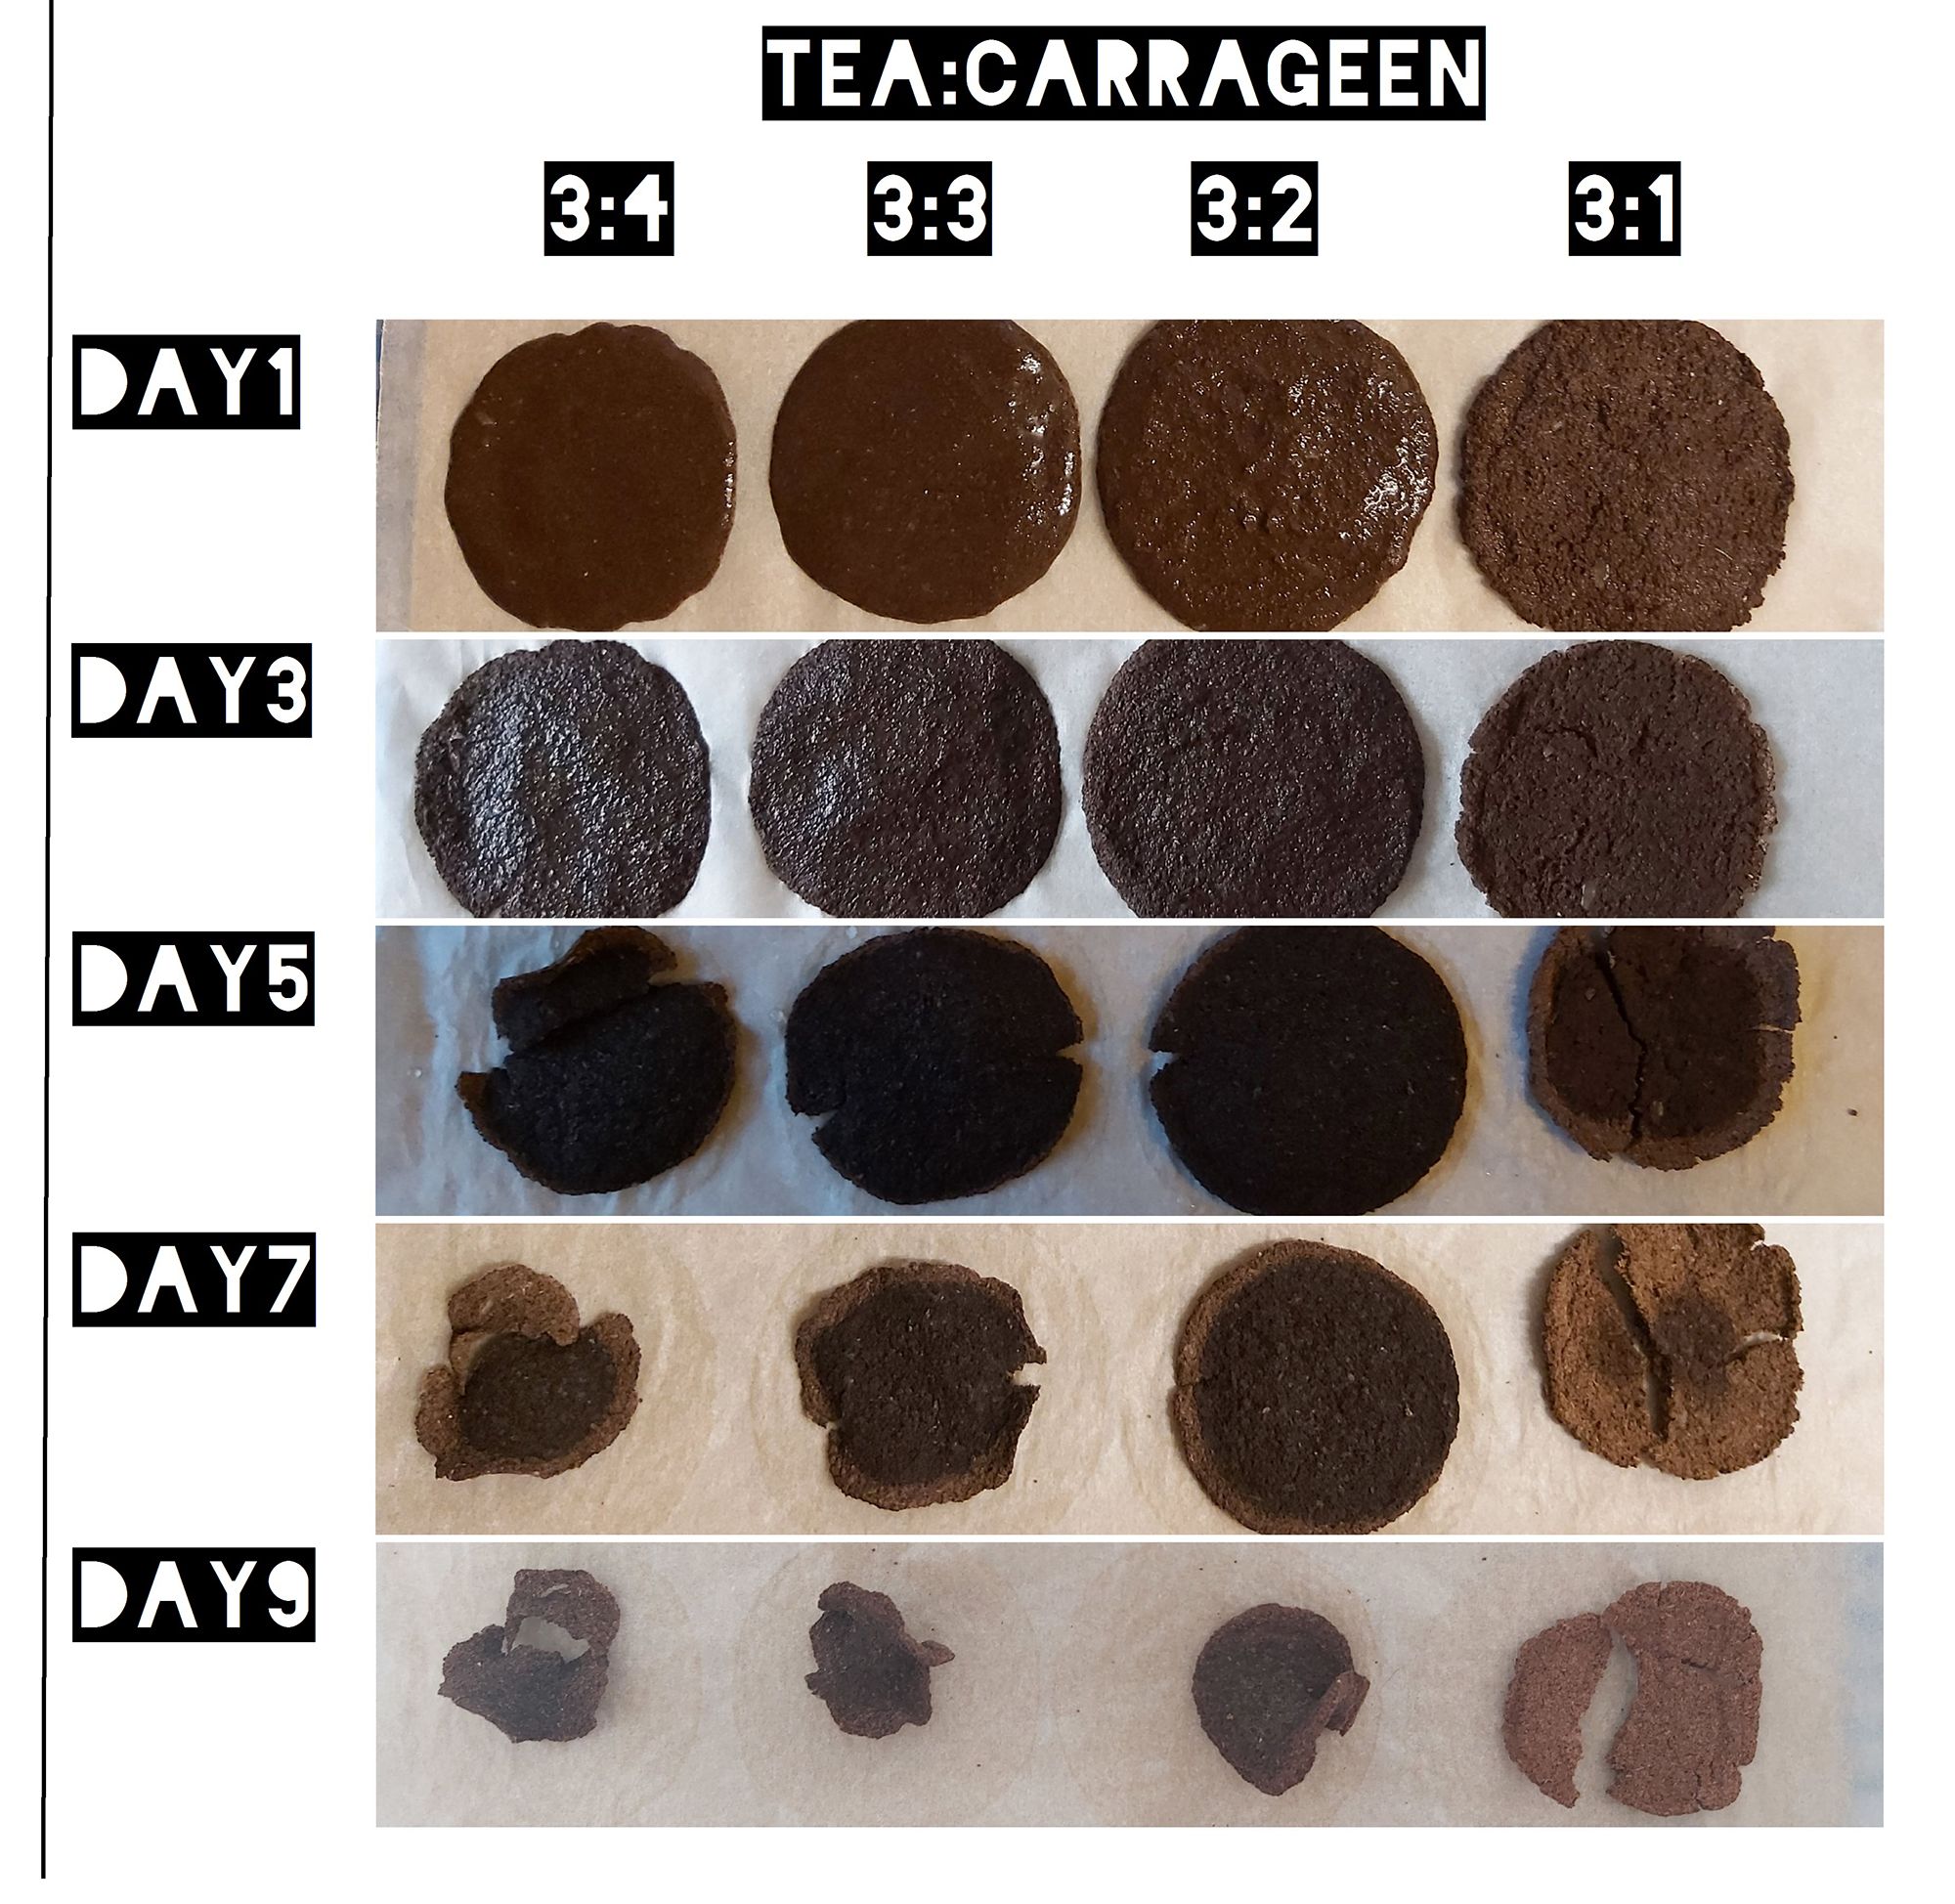  Image of tea carrageen showing its change in condition going through a drying process over 9 days. 